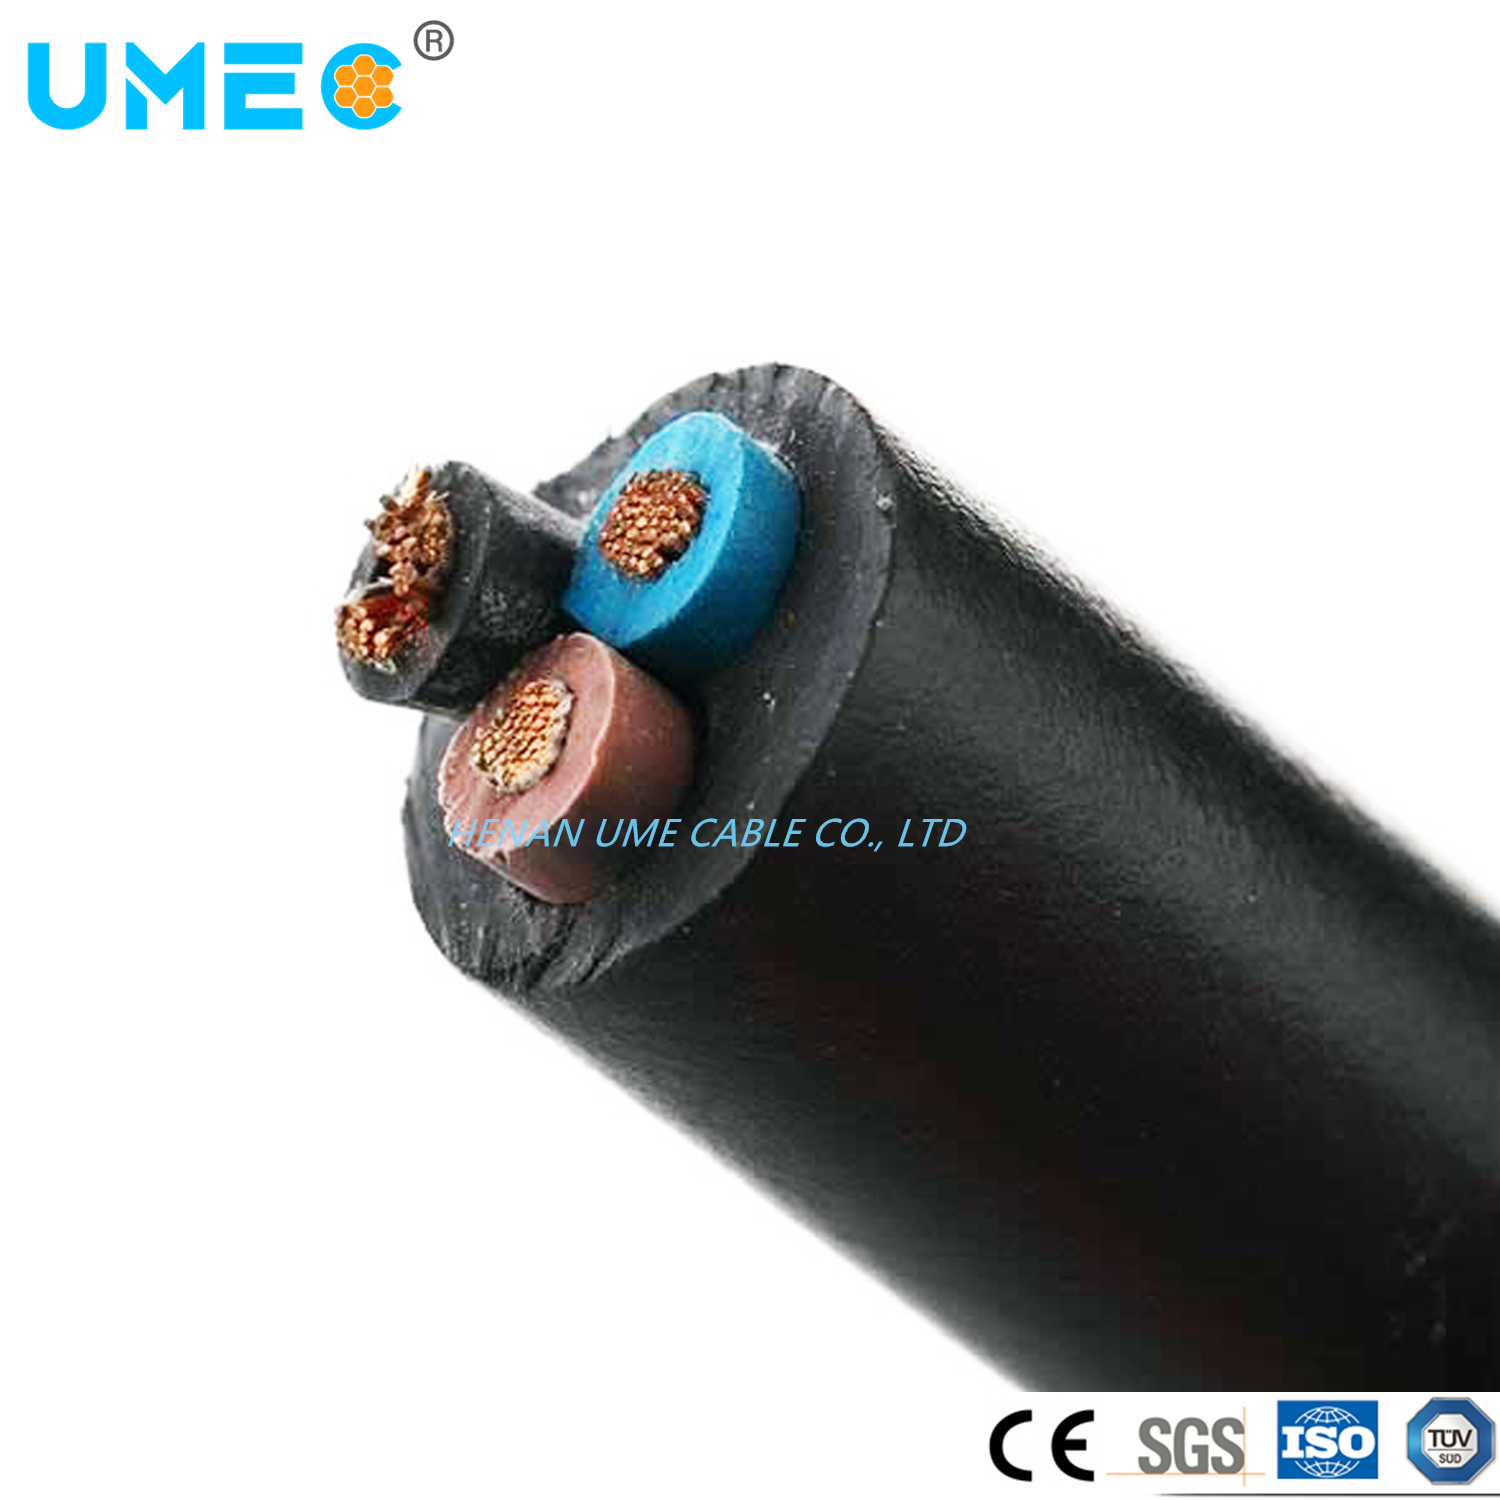 Europe Standard H03vvh2-F H03VV-F H05VV-F H05V-K H07V-K H05rn-F H07rn-F H05s-K Silicone/Neoprene/Epr/CPE Rubber Cable Power Cable